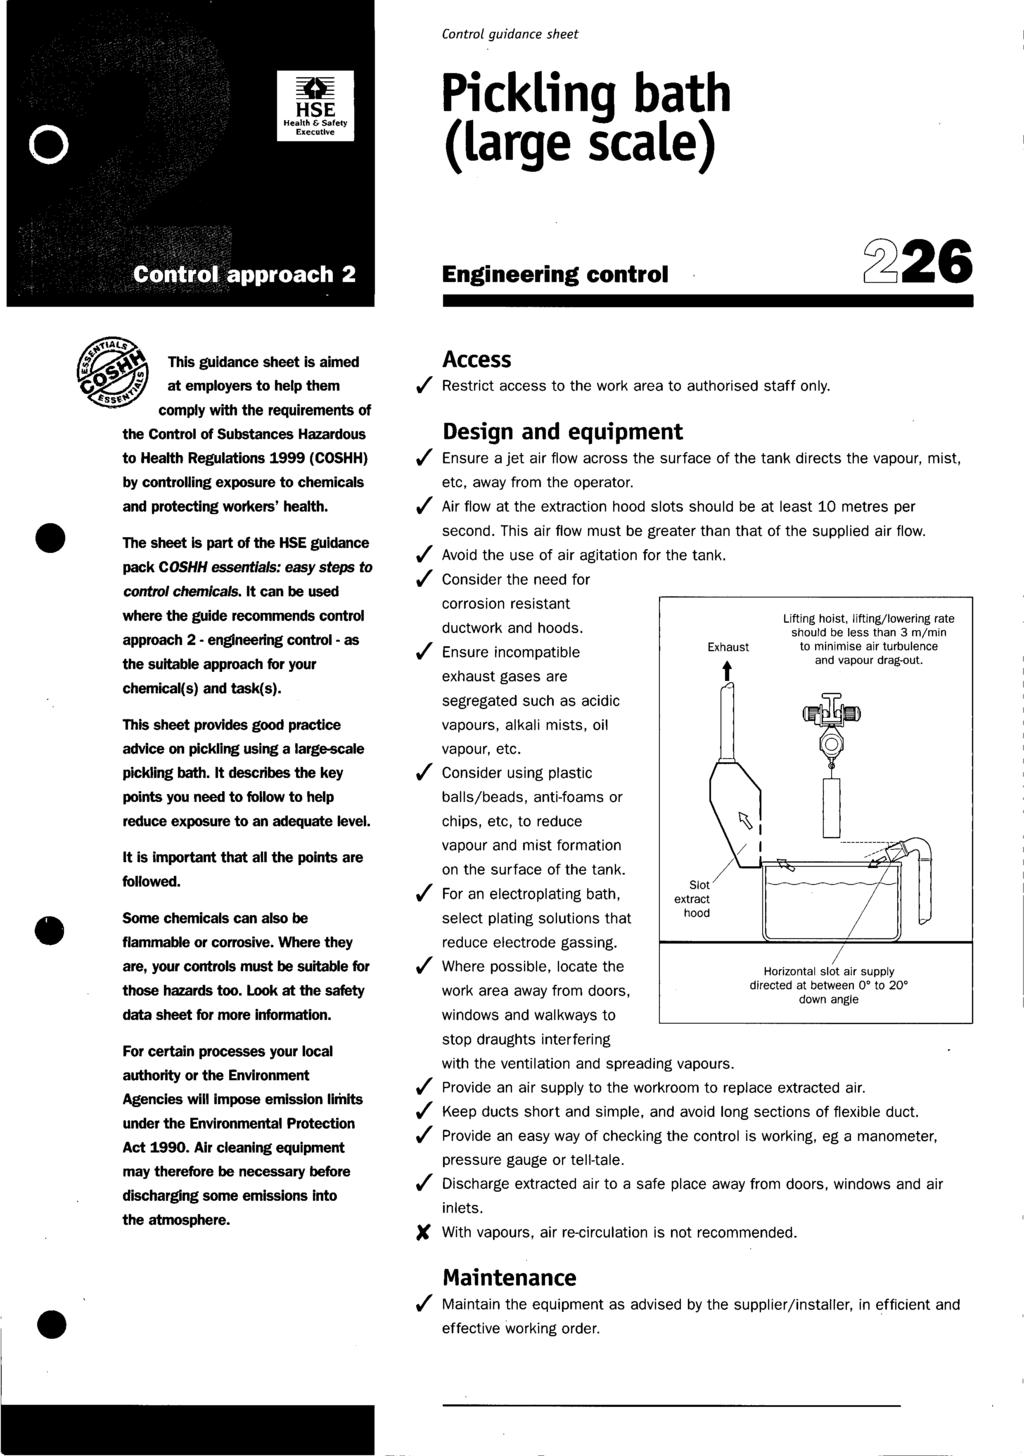 Control guidance sheet Pi c kli n g bath (large scale) Engineering control 2226 @ This guidance sheet is aimed at employers to help them comply with the requirements of the Control of Substances